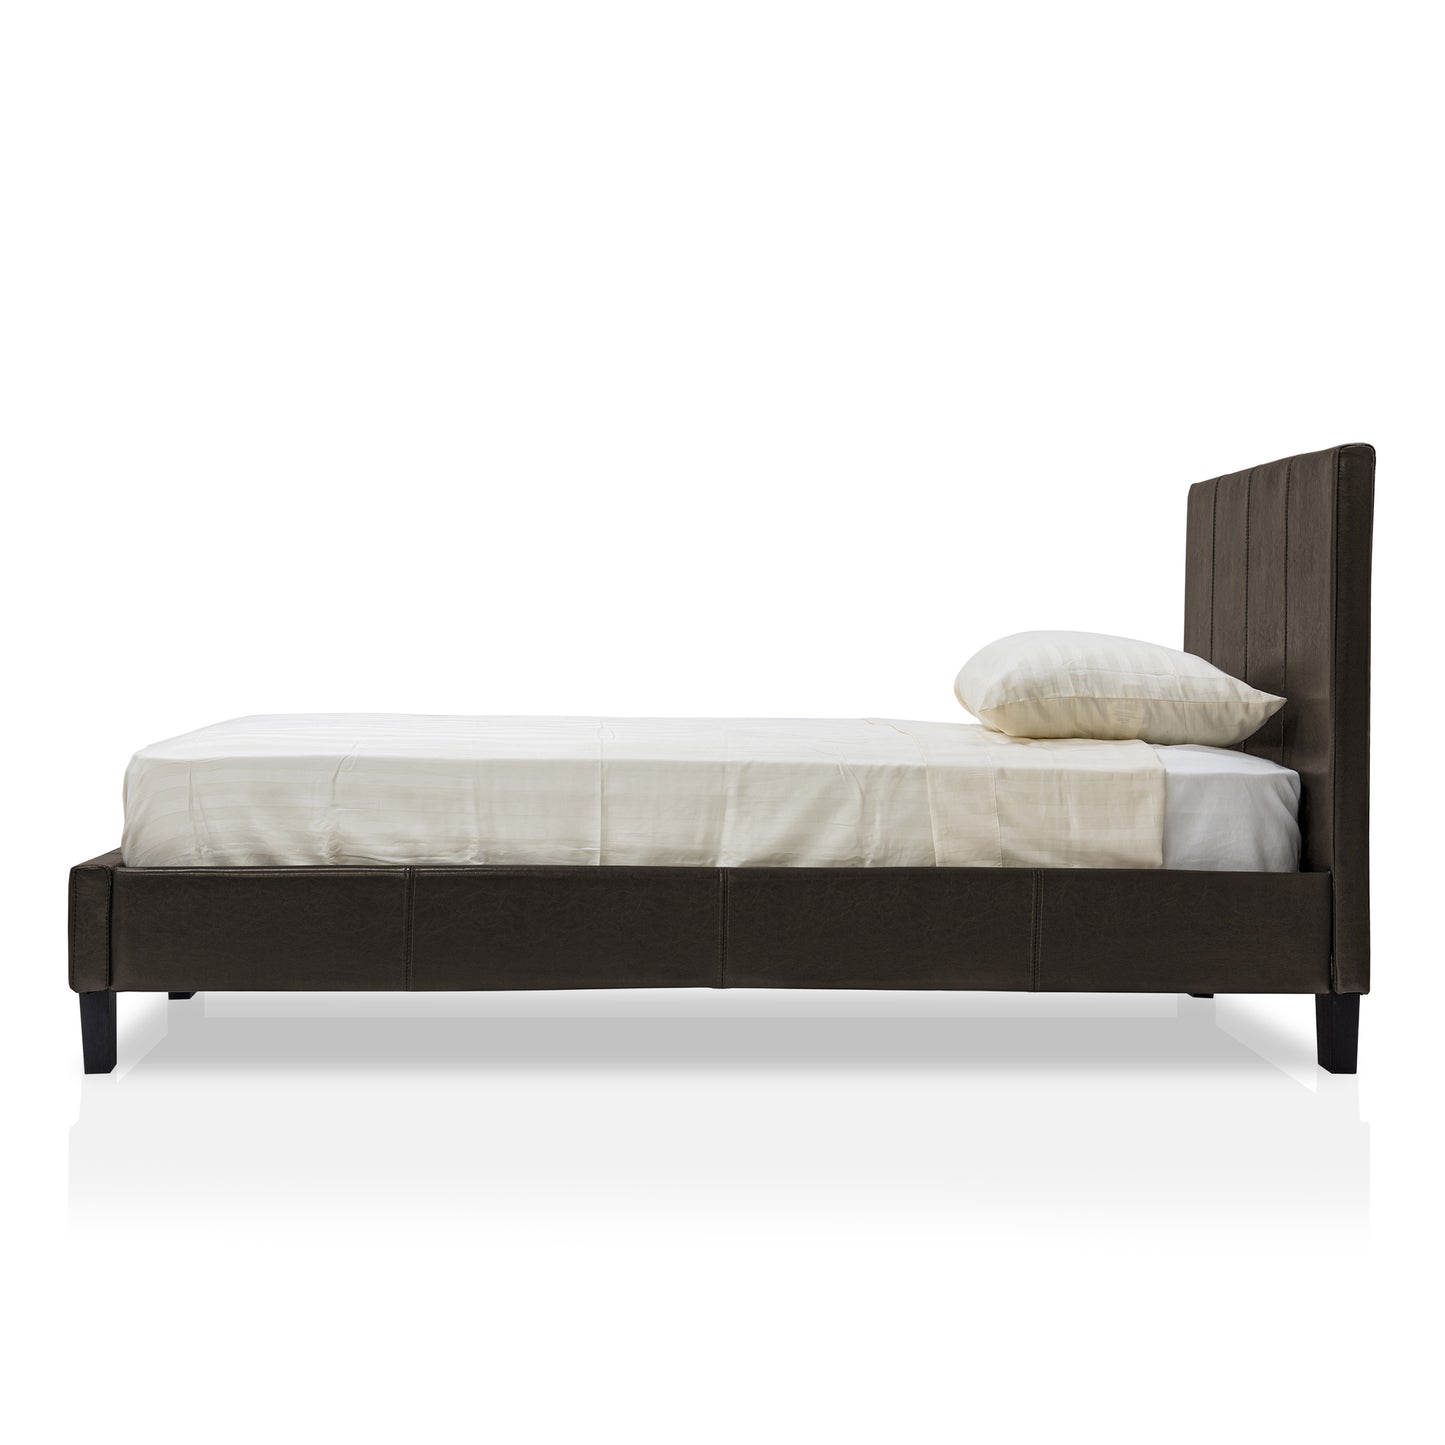 Front-facing side view of a contemporary espresso faux leather twin platform bed with linens on a white background